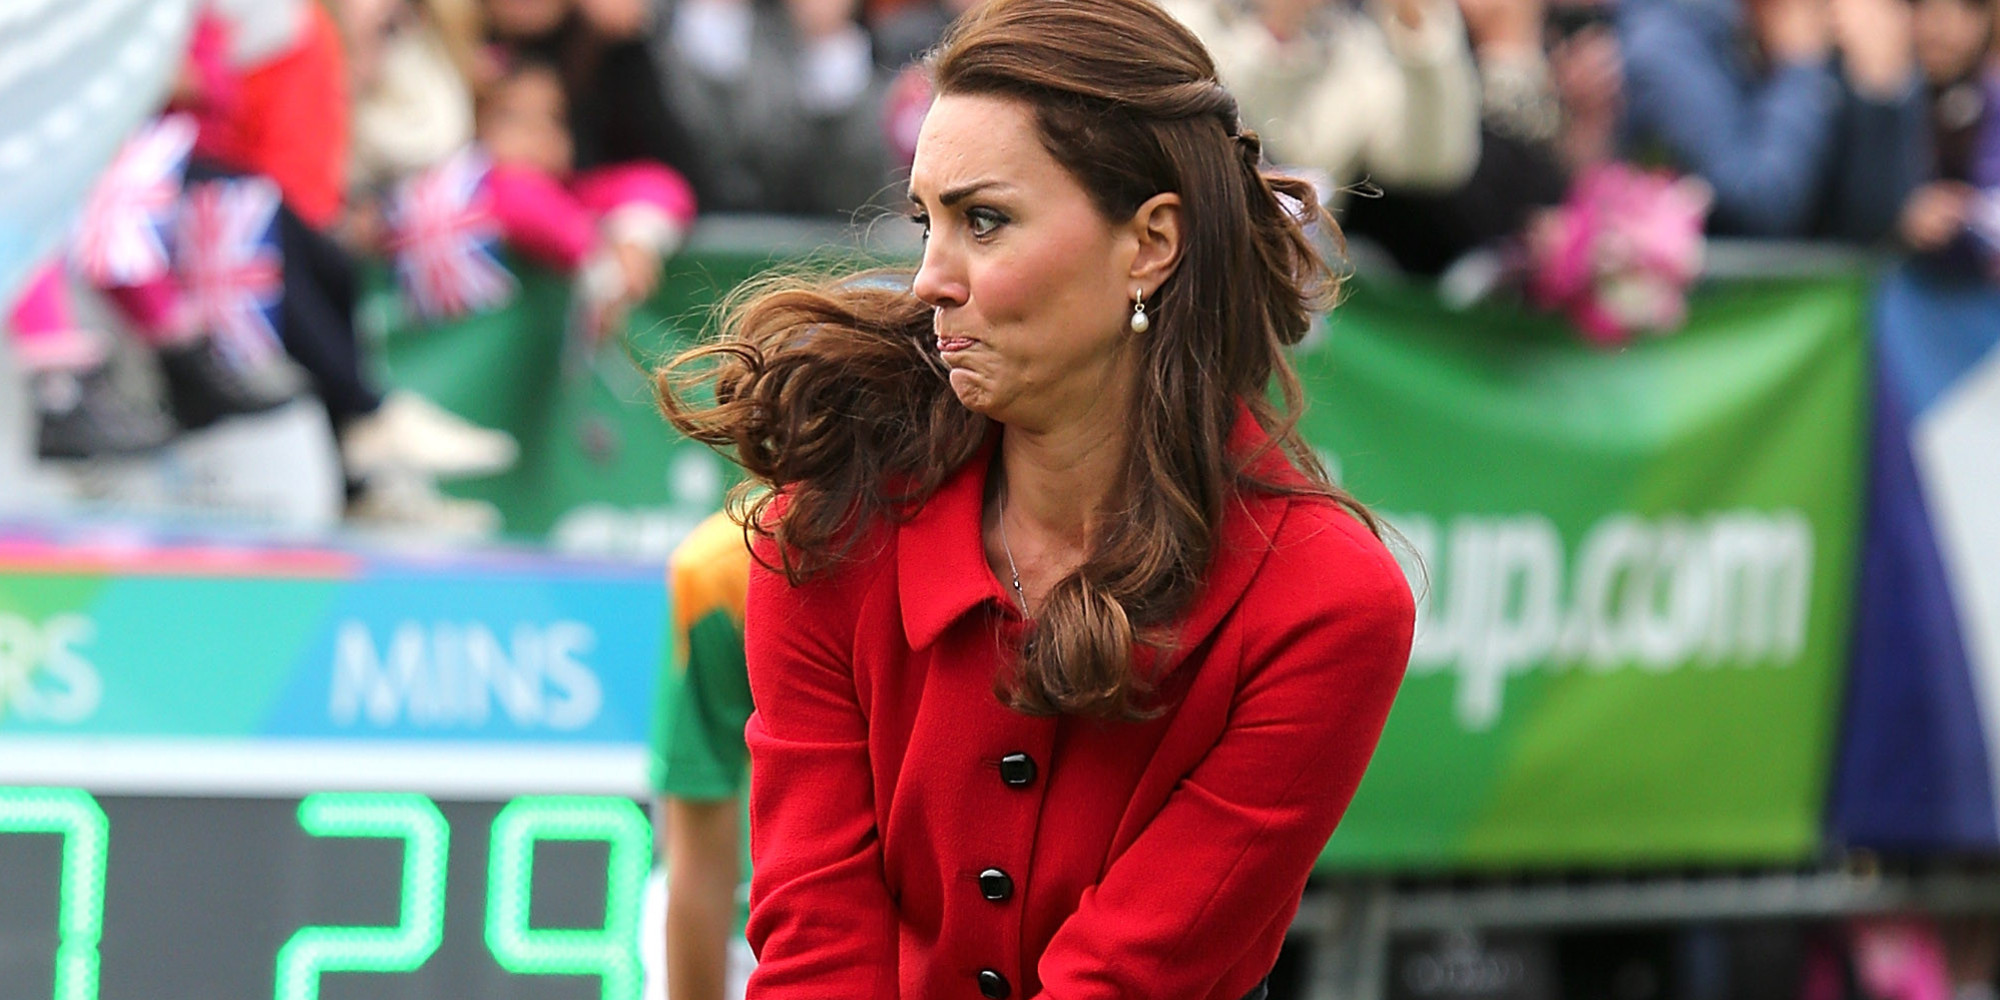 43 Funny Moments From The Royal Family's Tour Of Australia And New Zealand | HuffPost